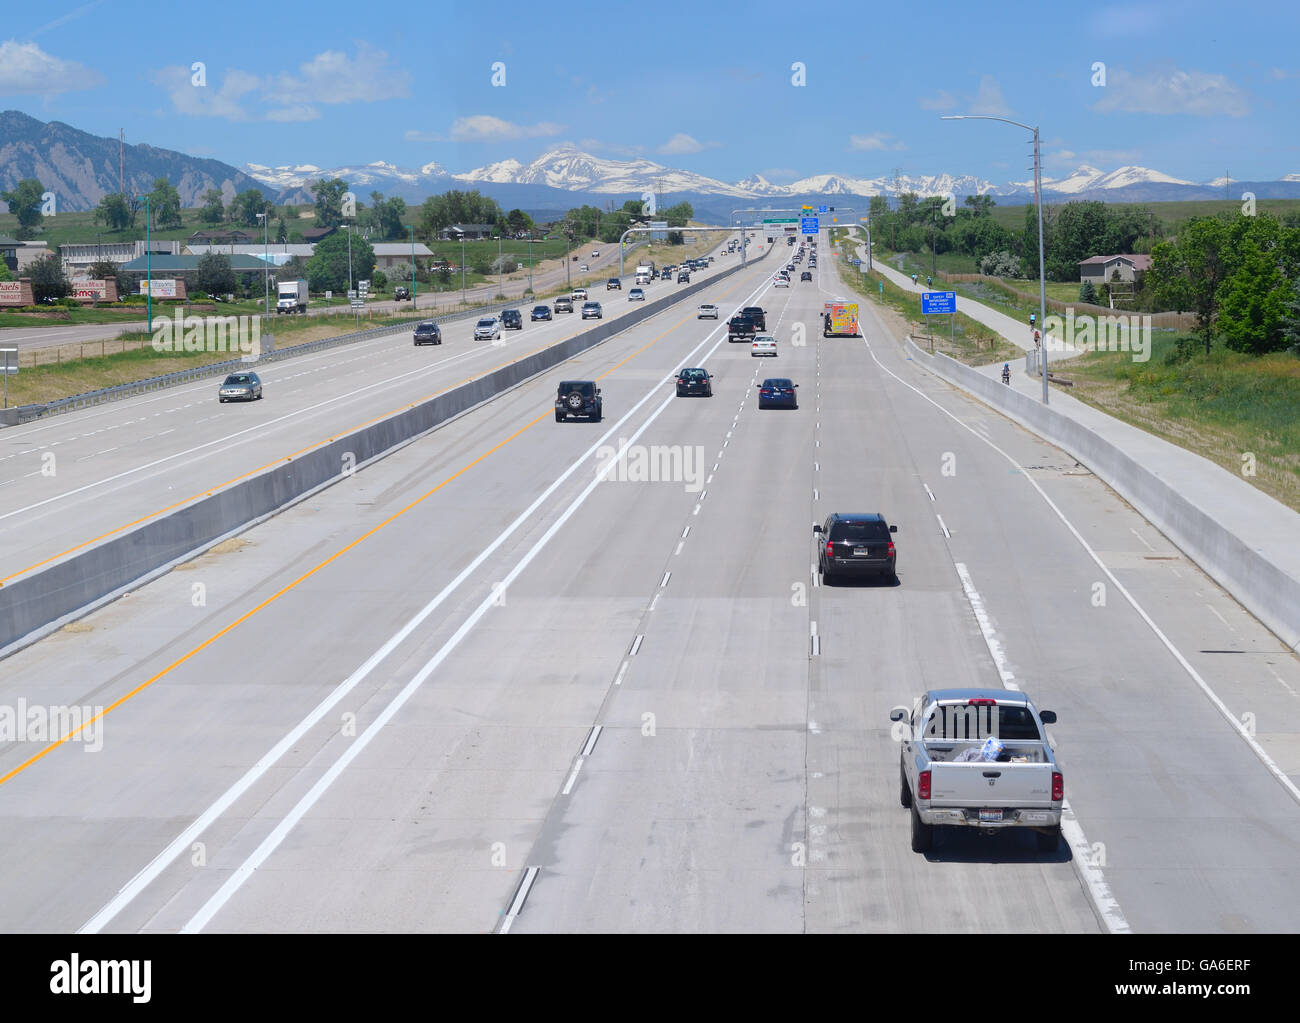 U.S. 36 Express Lanes (public/private) Project completed 2016, the express lane (left) is for high occupancy vehicles, those paying a toll and buses. Stock Photo